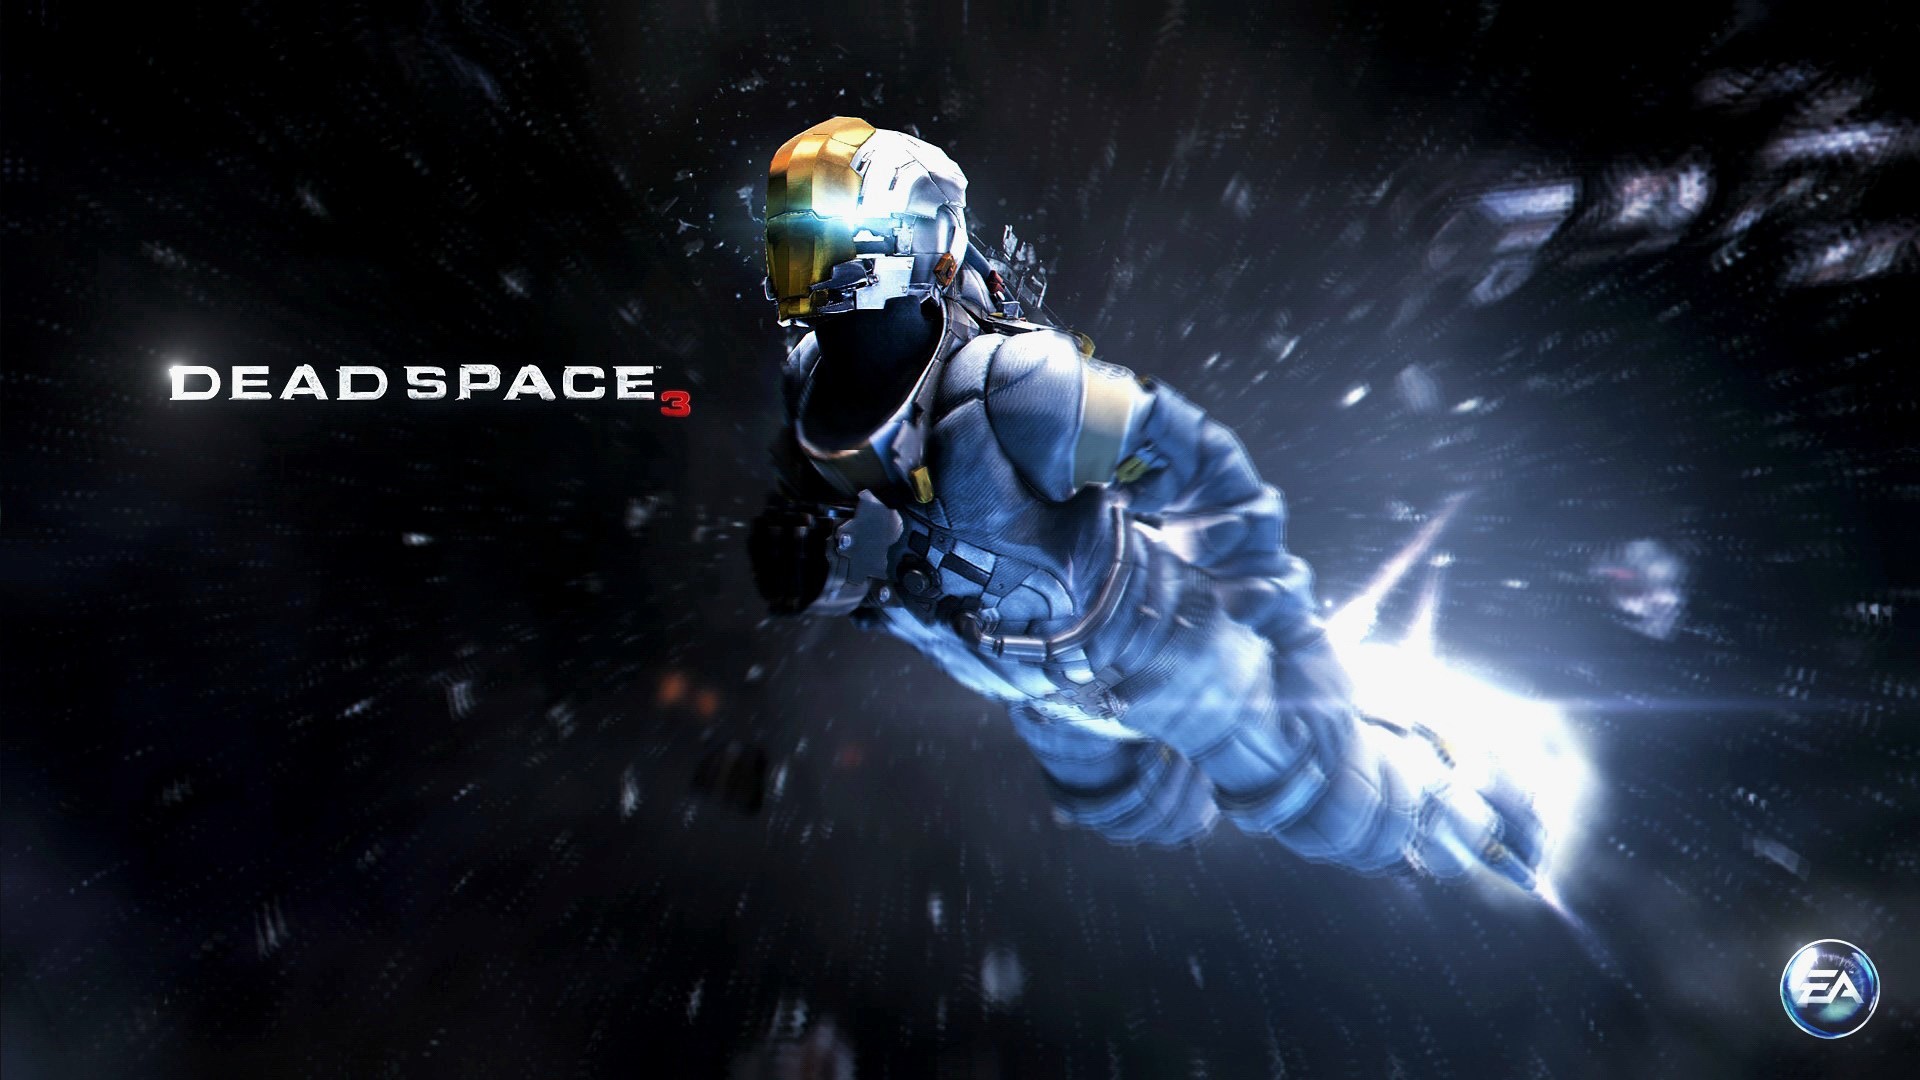 1920x1080 Free Computer Wallpaper For Dead Space 3 1920x1080